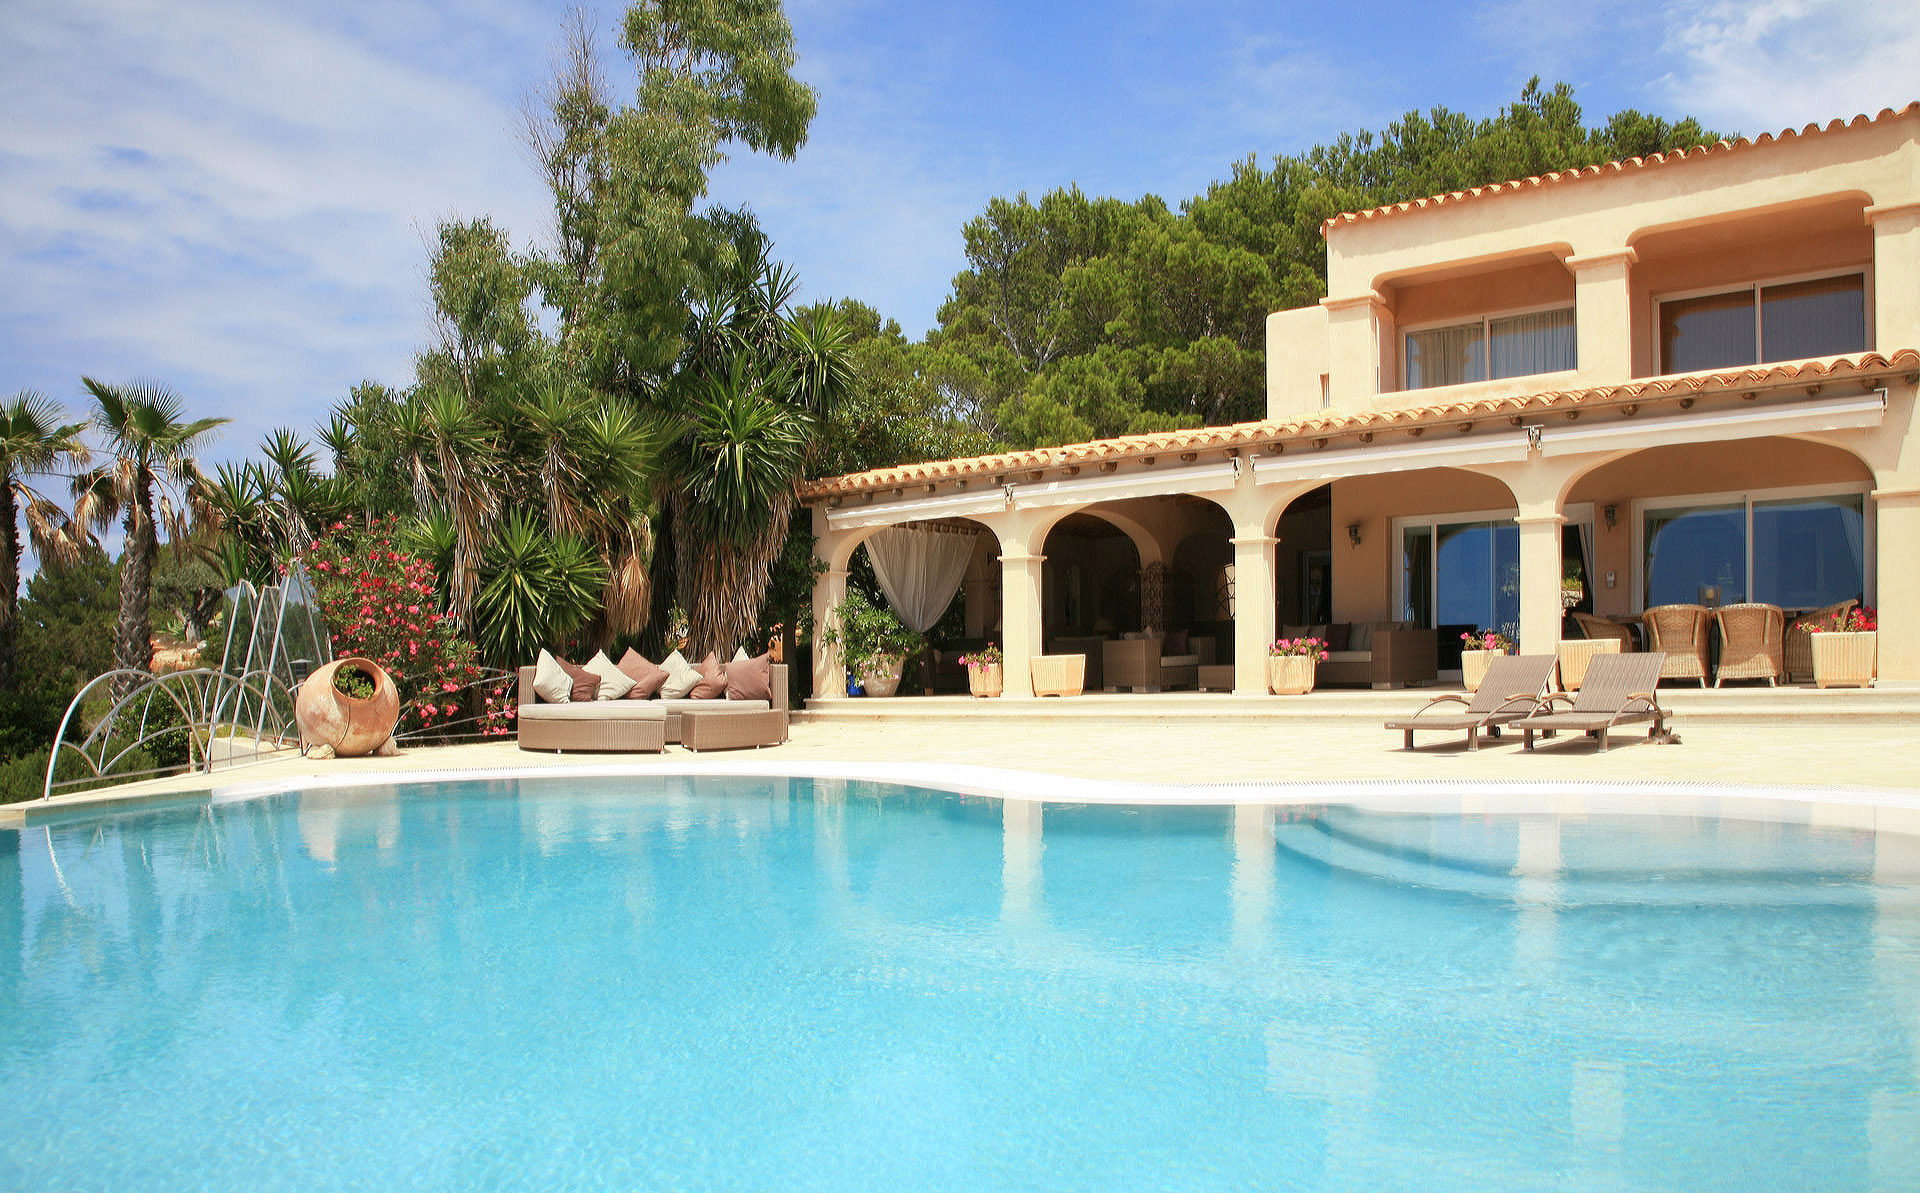 Spain: Villa in southern style